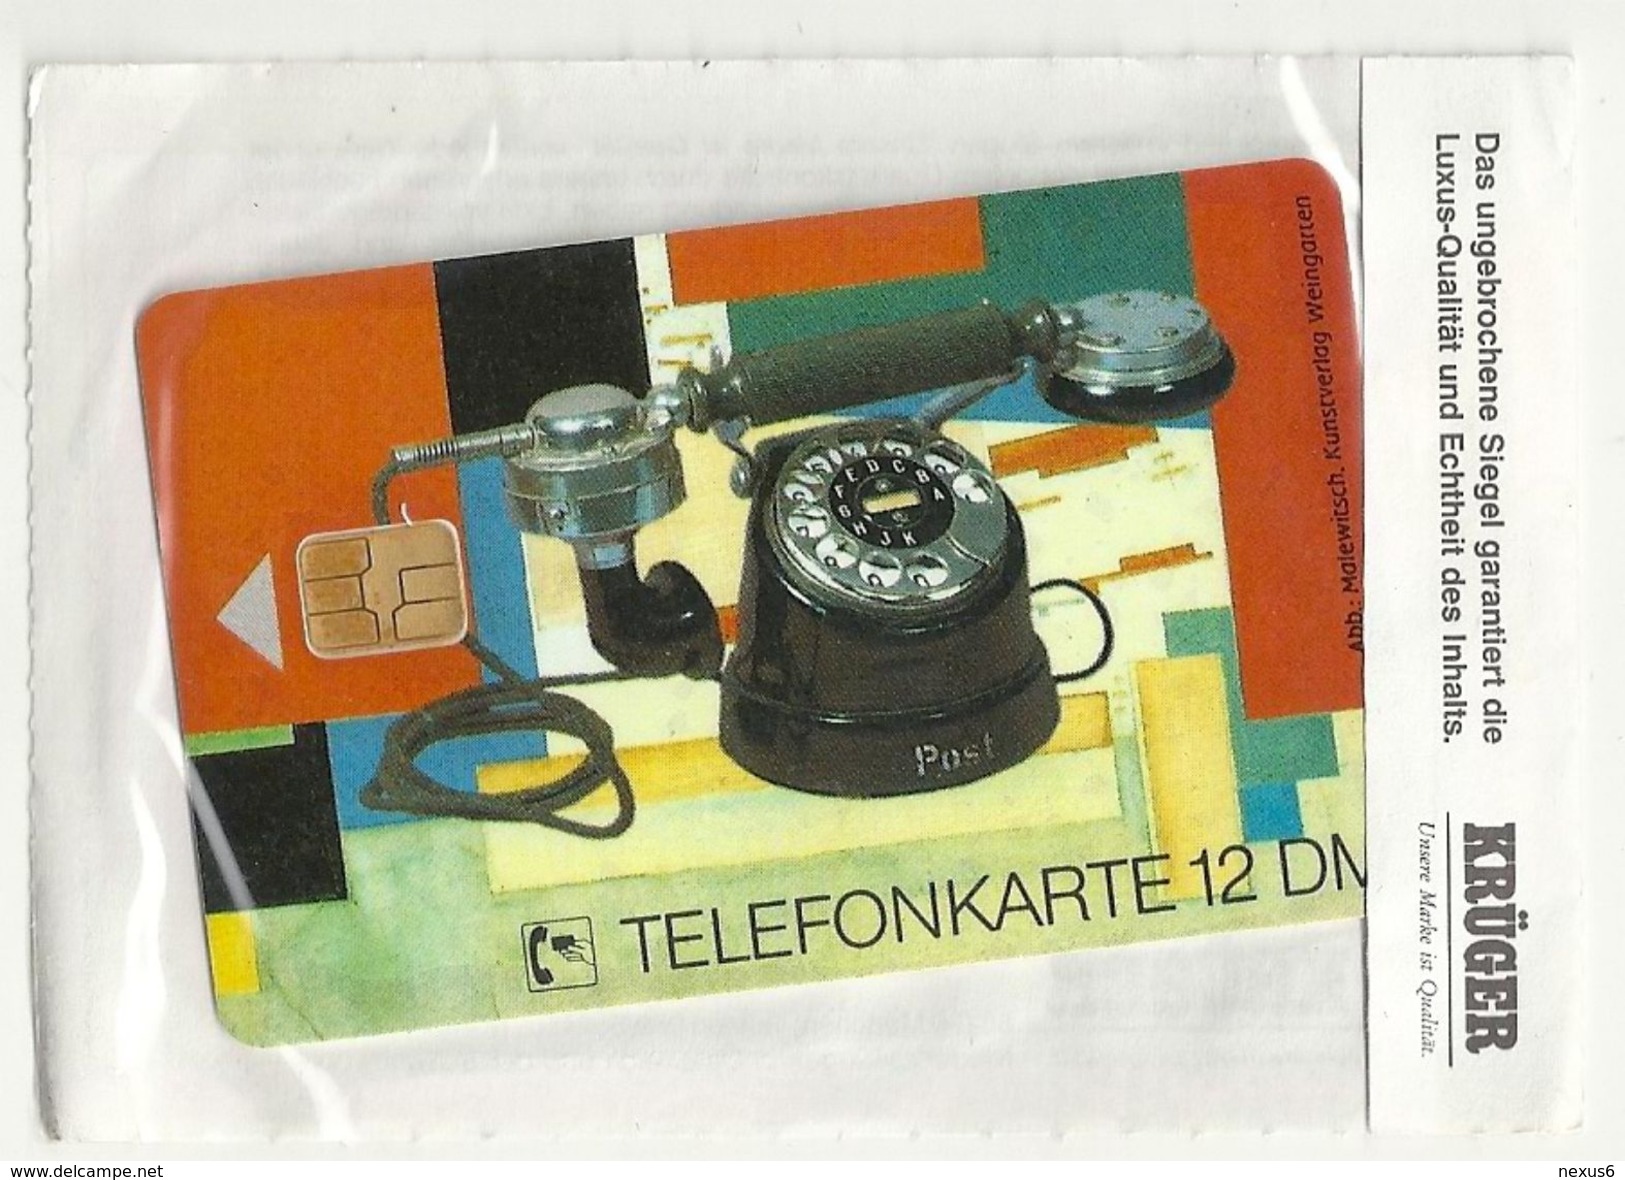 Germany - Alte Telefonapparate 4 - Collector's E08 08.92 - 12DM, 30.000ex, Mint In Kruger - E-Series : D. Postreklame Edition